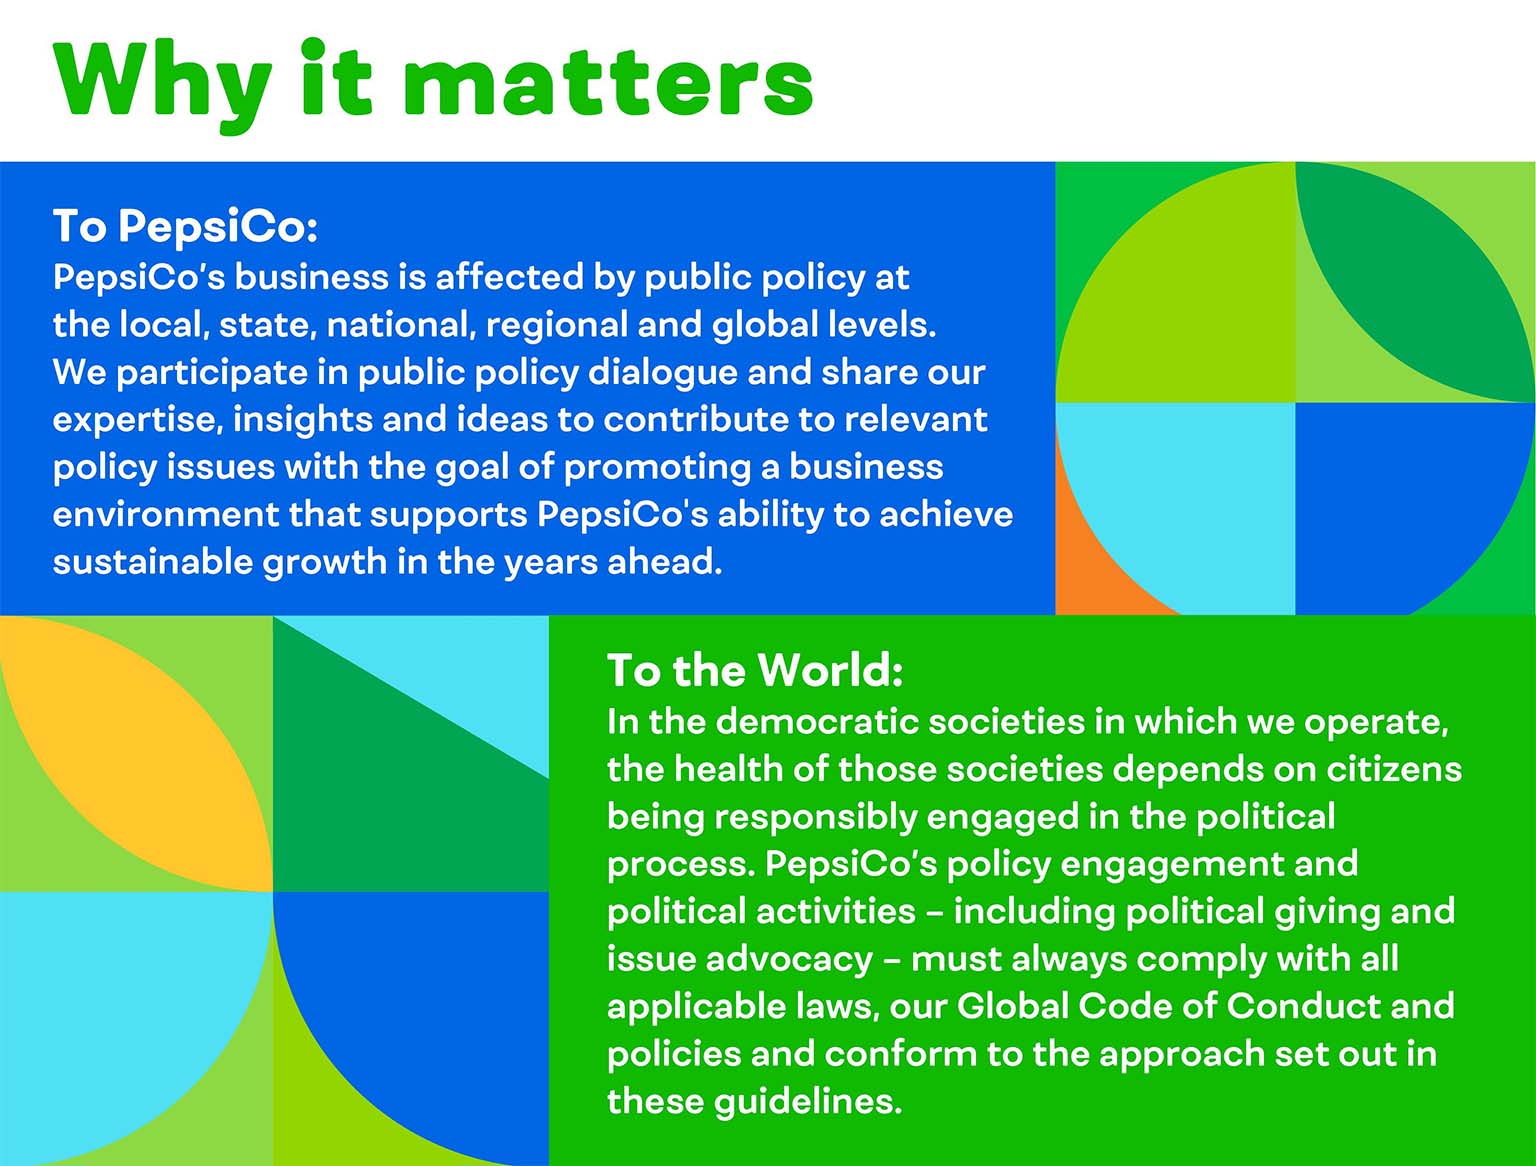 public-policy-engagement-political-activities-contributions-guidelines-why-it-matter